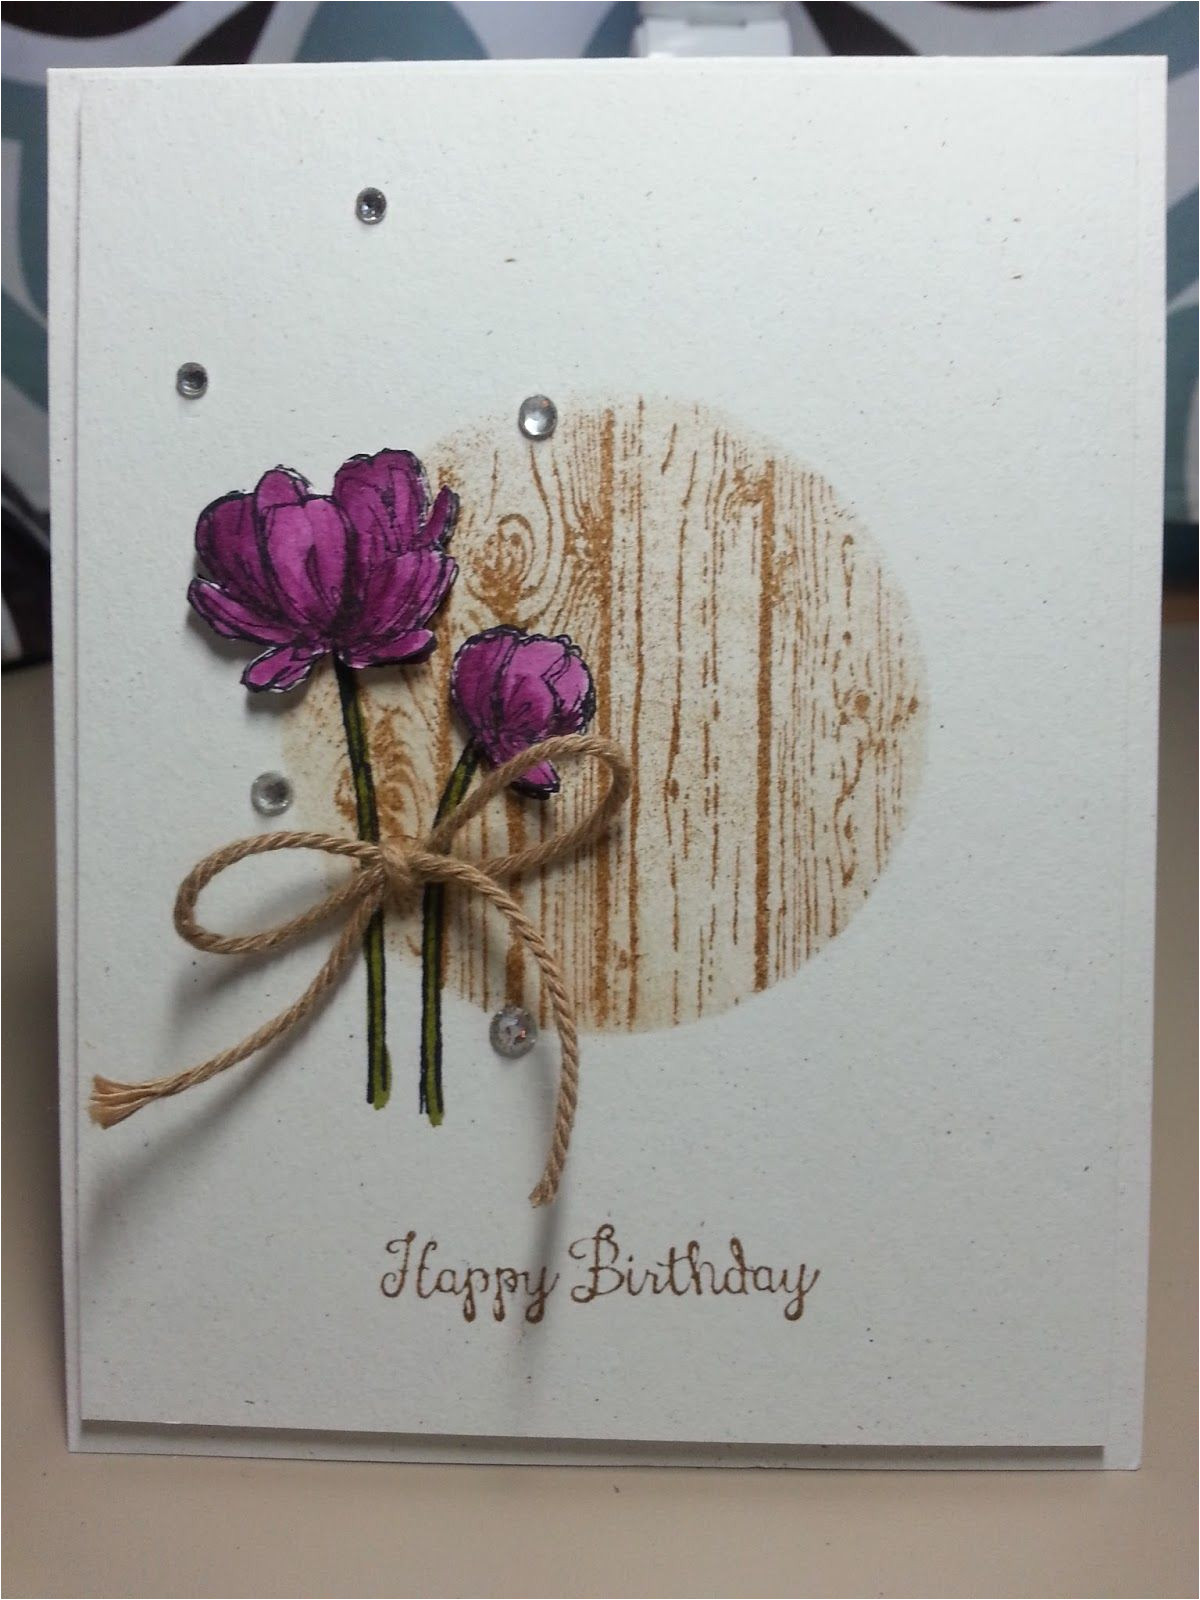 Greeting Card Handmade for Birthday Blooming with Simplicity Floral Cards Greeting Cards